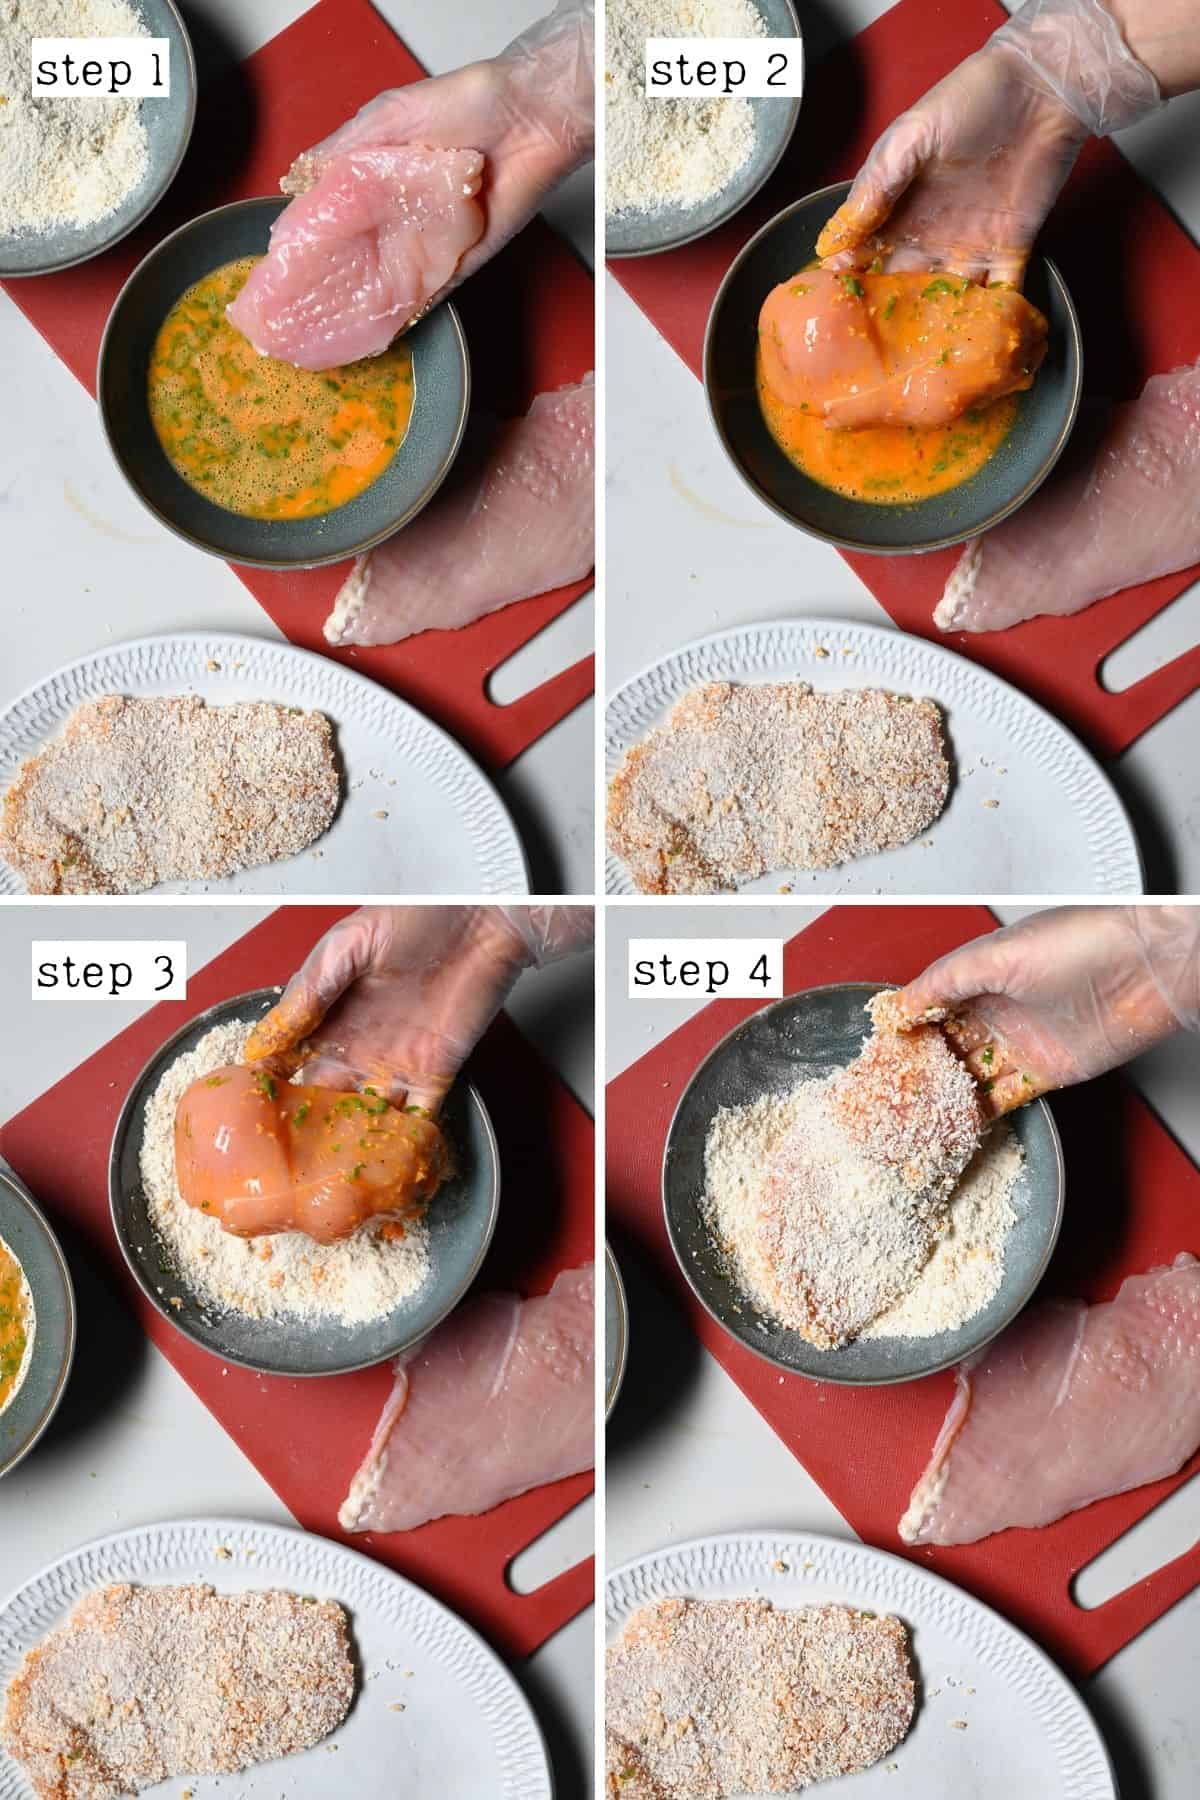 Steps for breading chicken breasts